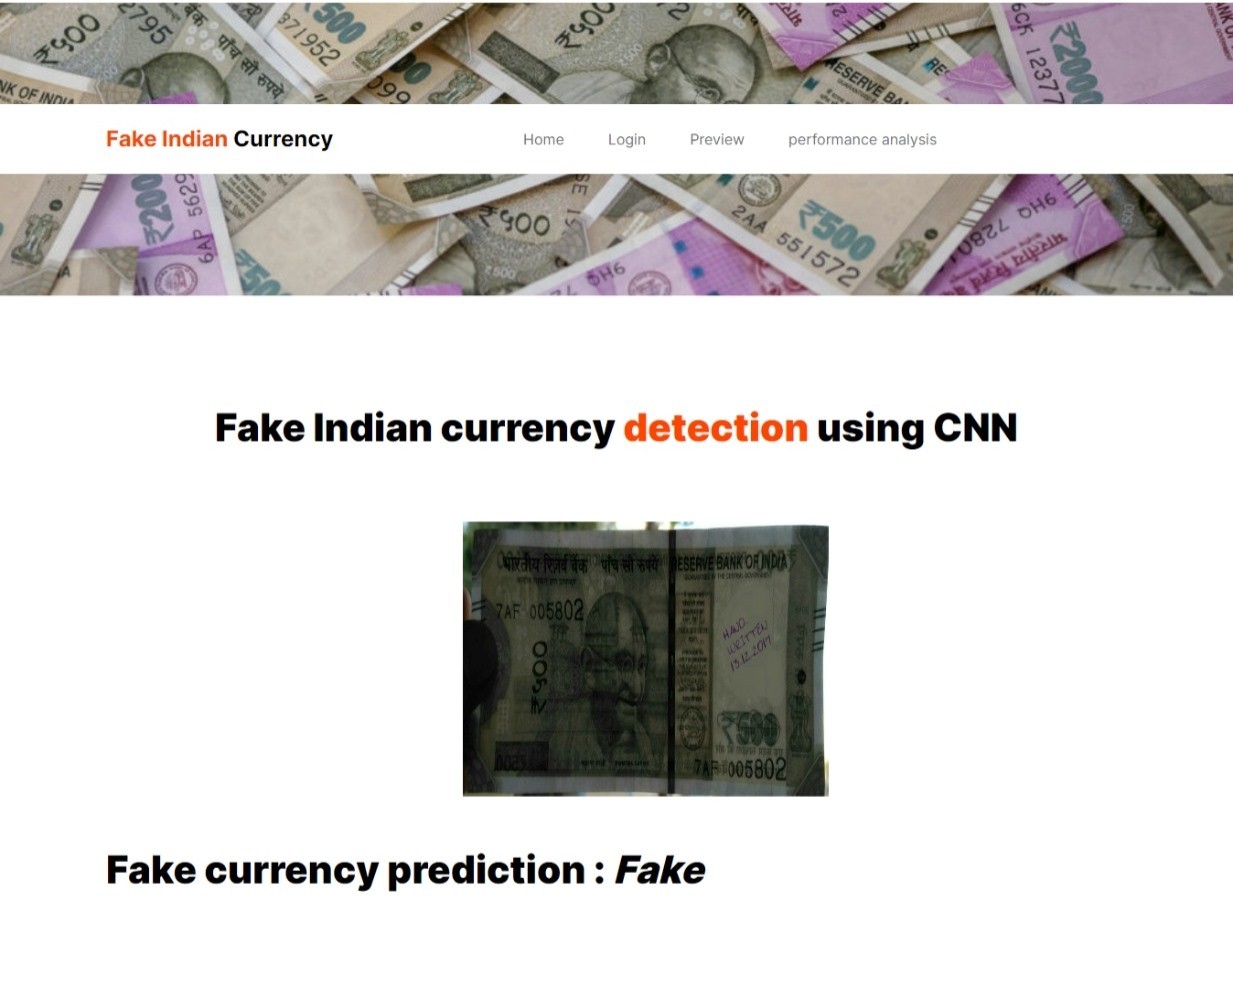 JPPY2207-Identification of Fake Indian Currency